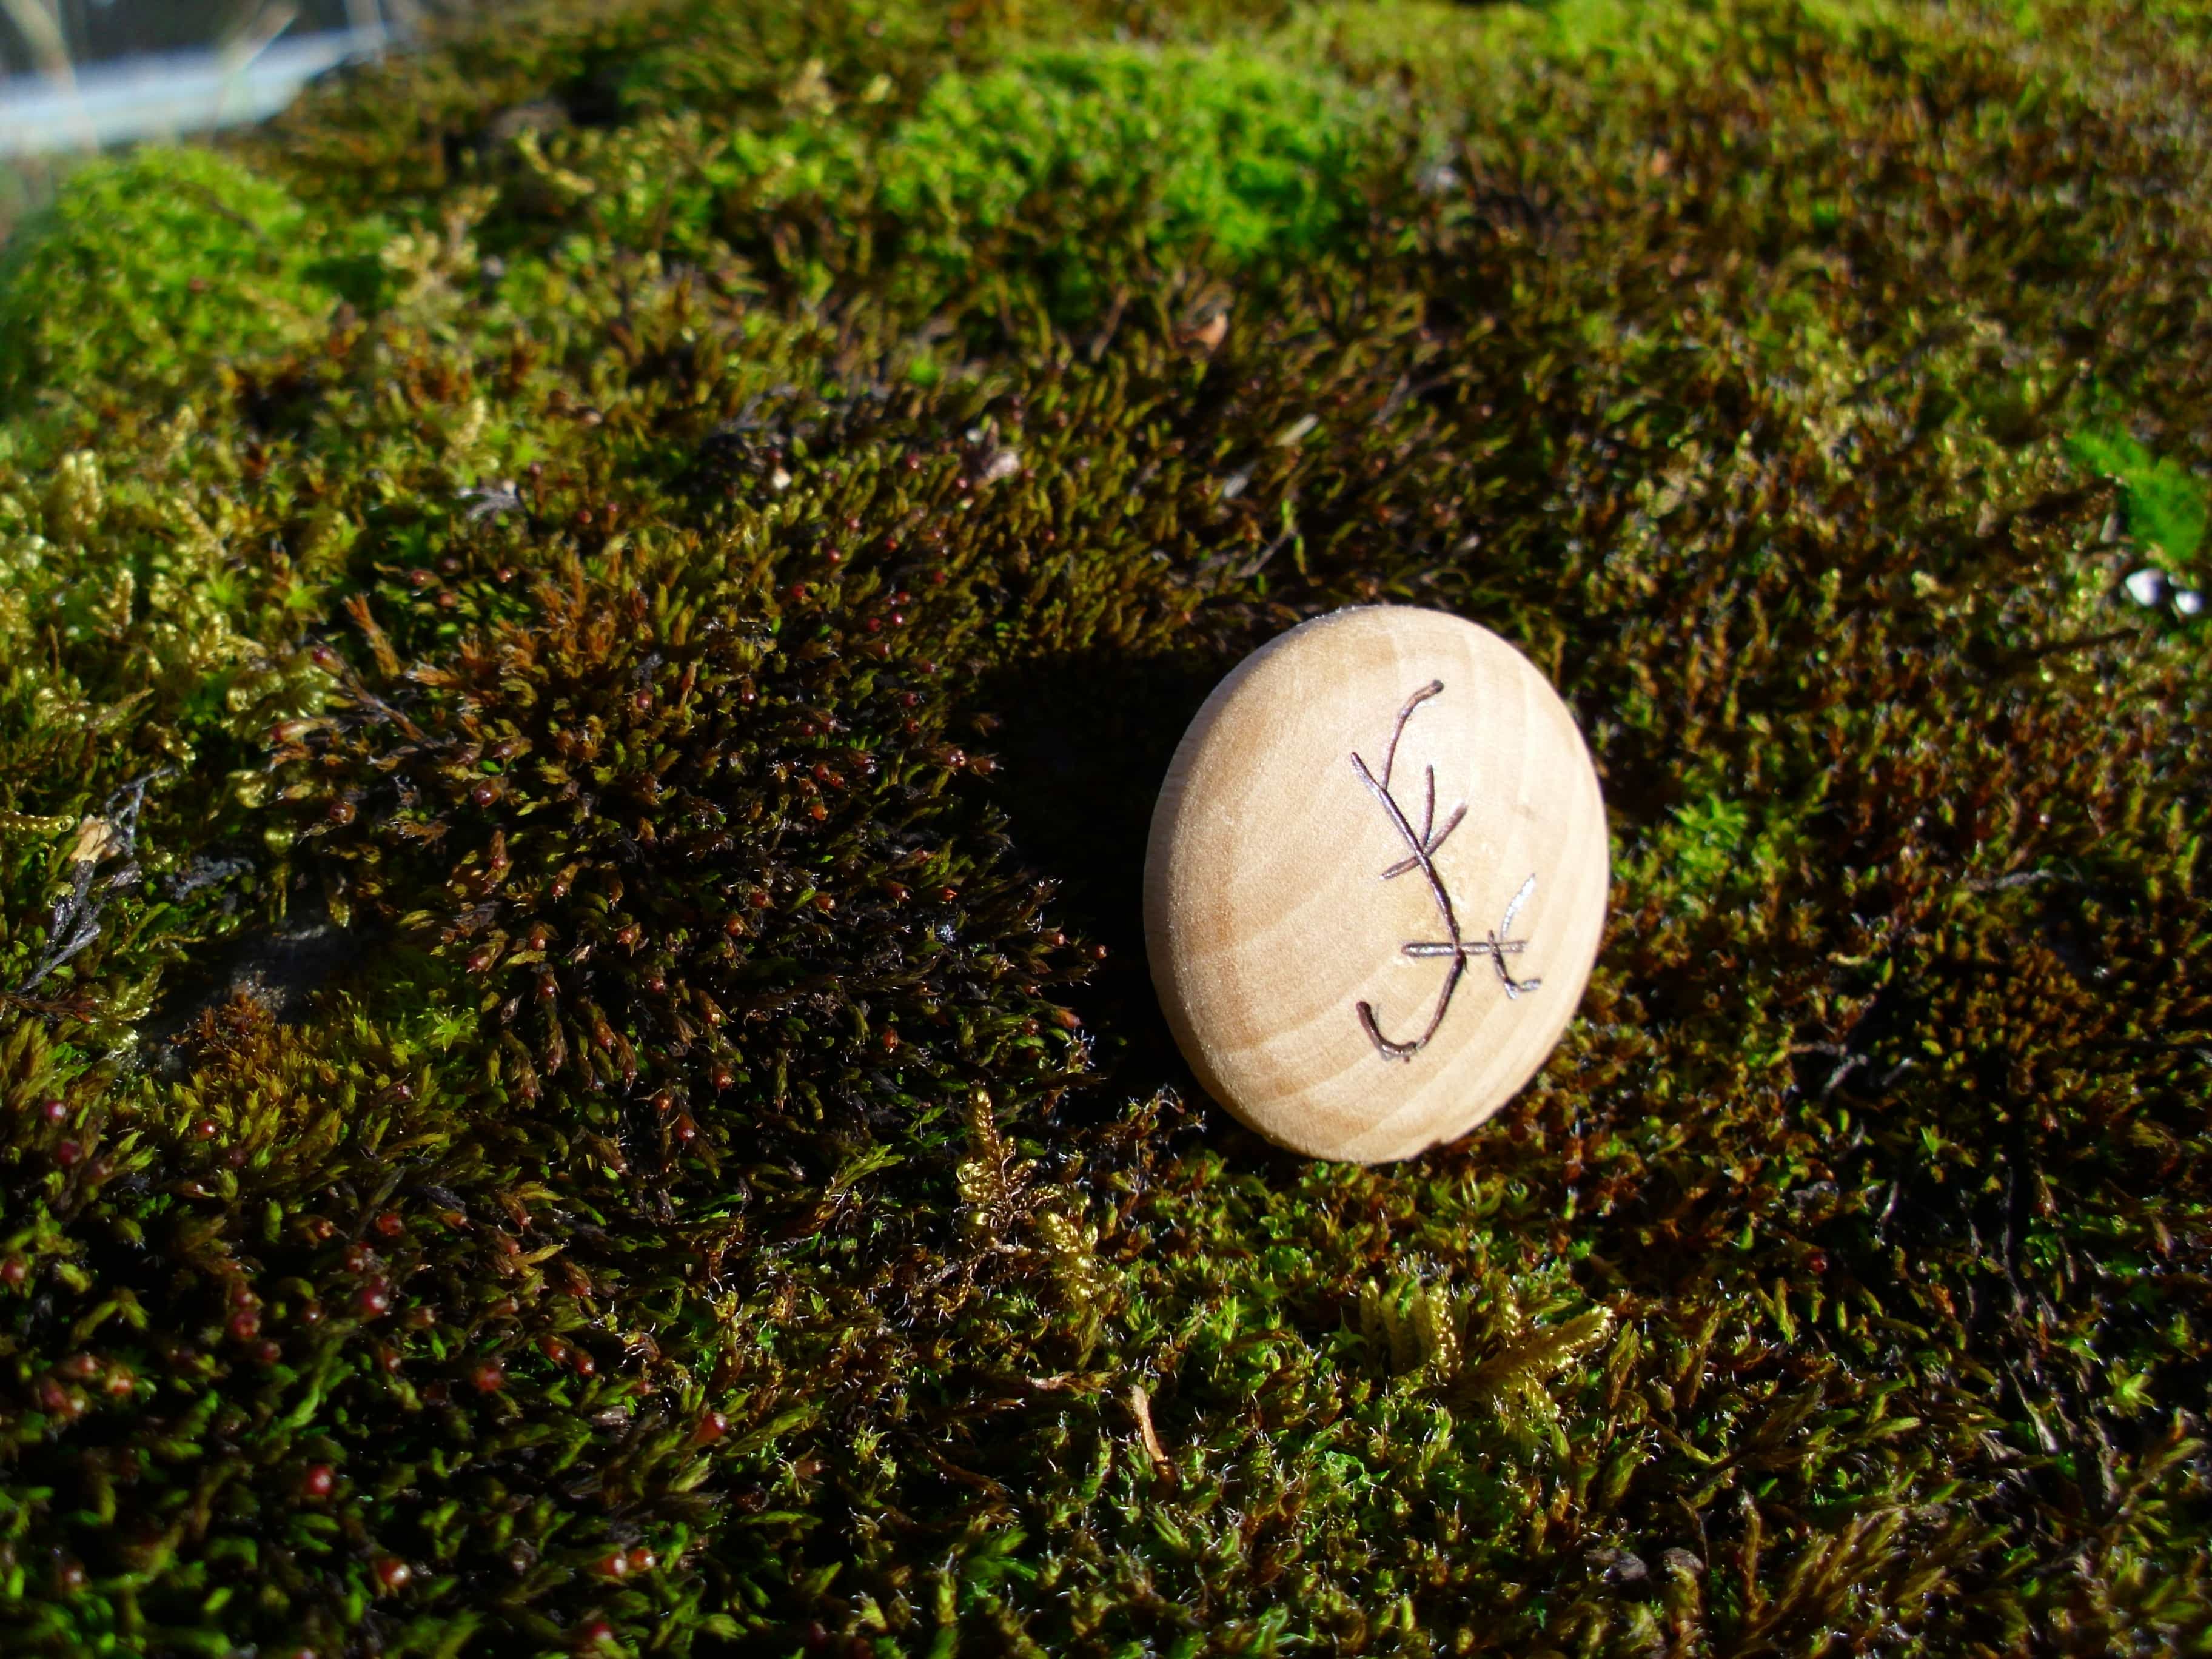 Dream Amulet - Pocket Rune to dream of a desired thing - Wooden Rune Amulet / Drømmeamulett